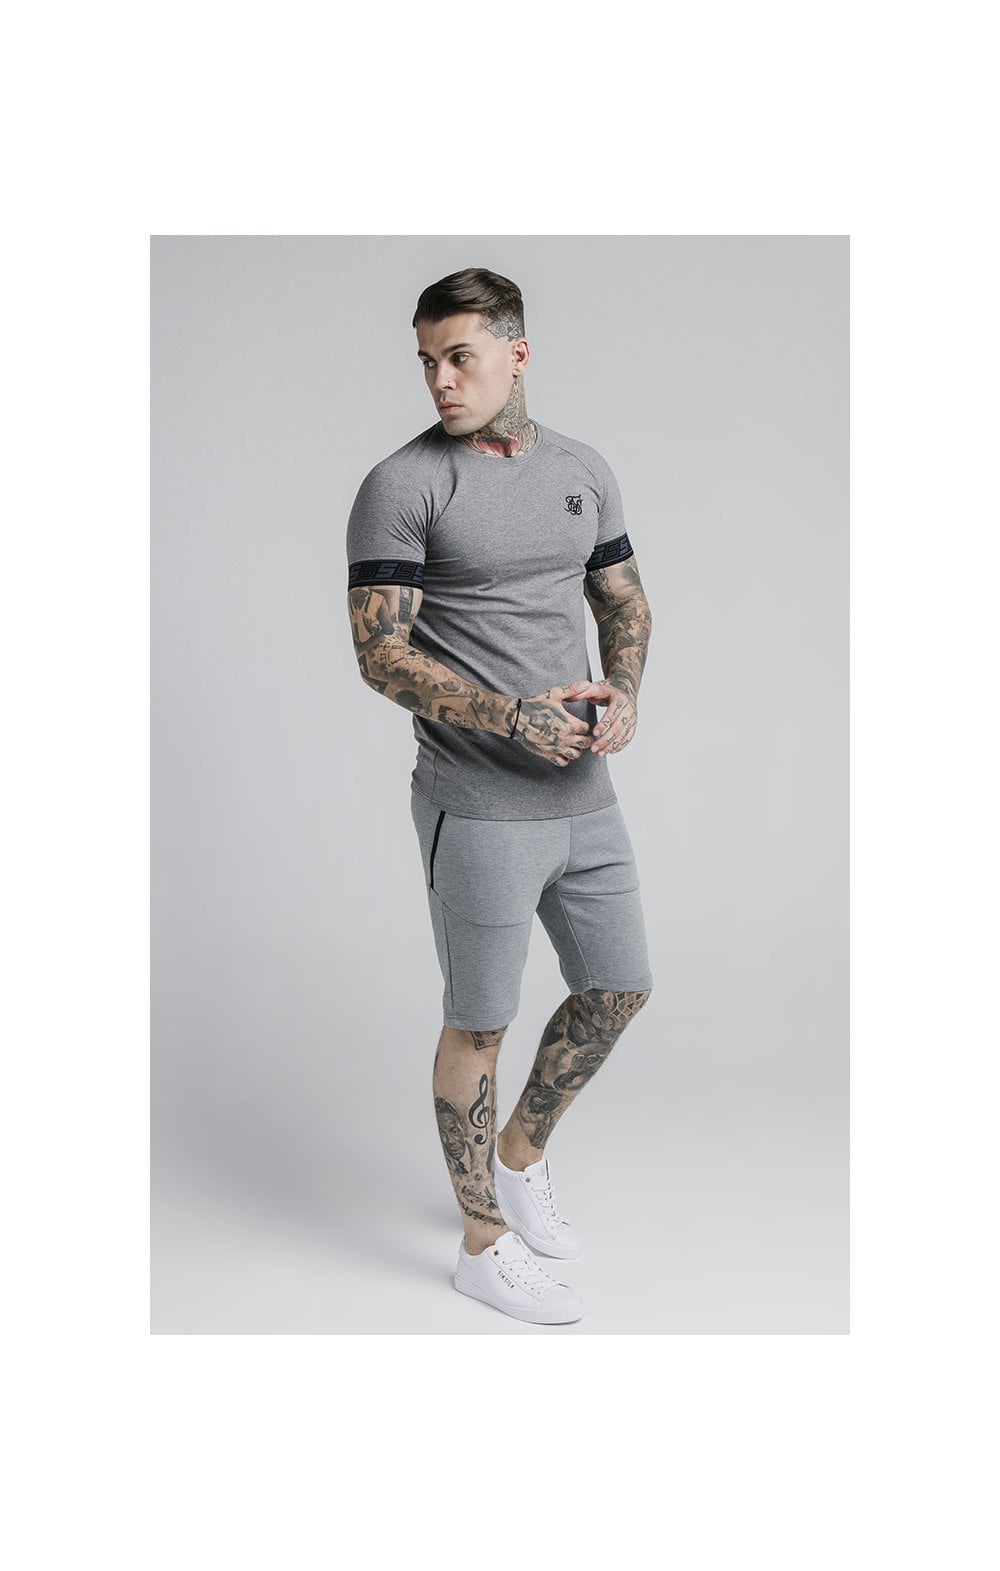 Load image into Gallery viewer, SikSilk S/S Exhibit Tech Tee - Grey Marl (5)